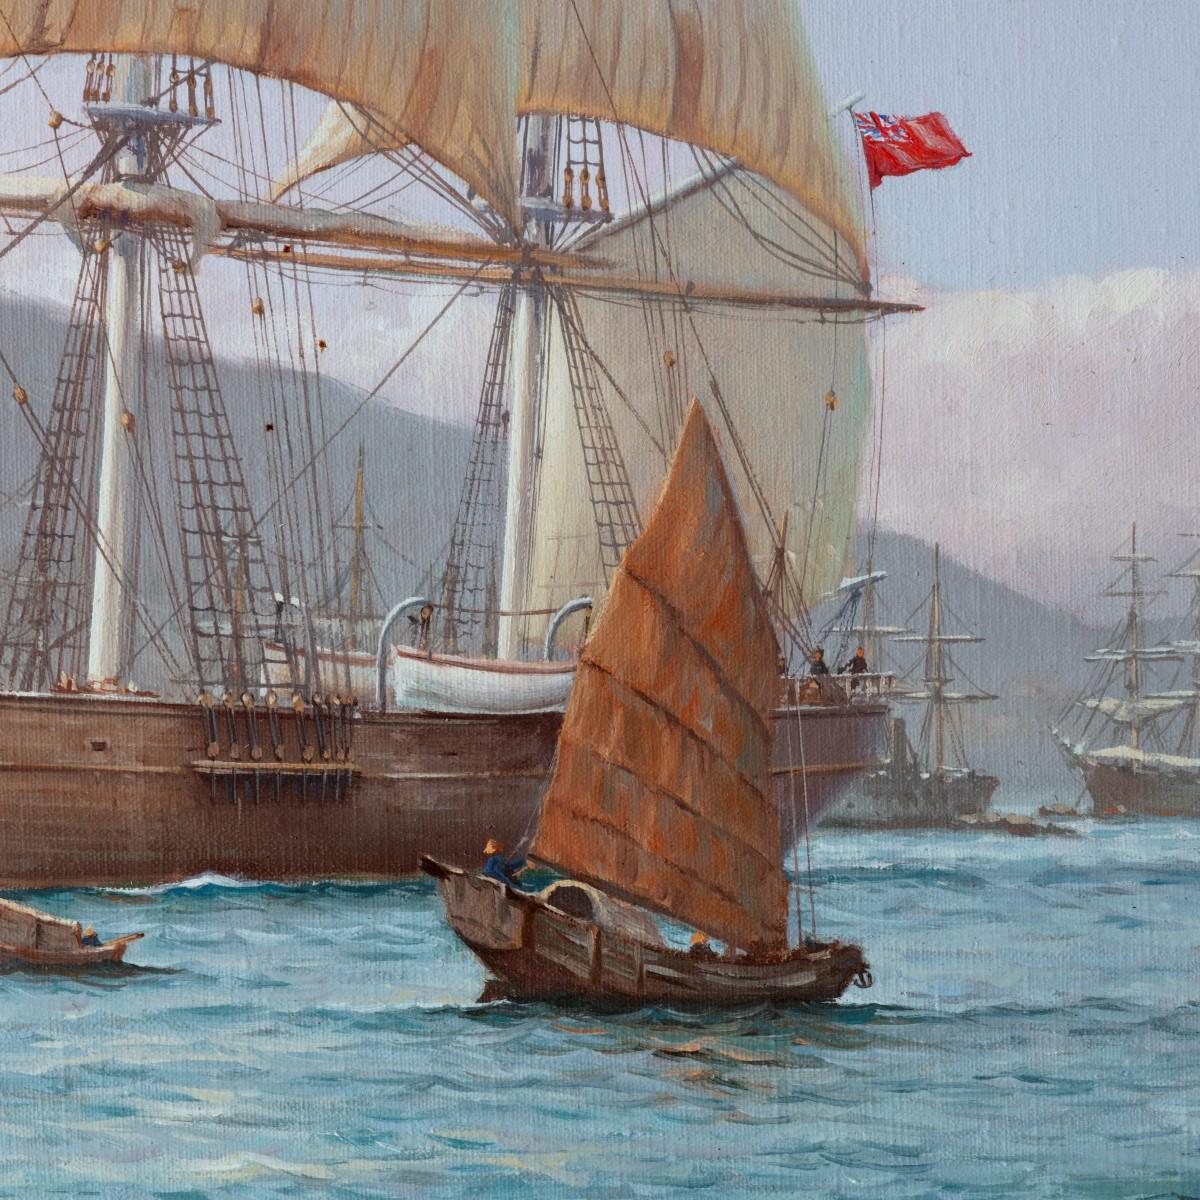 The Challenger Arrives off Kowloon Hong Kong, by Rodney Charman 1